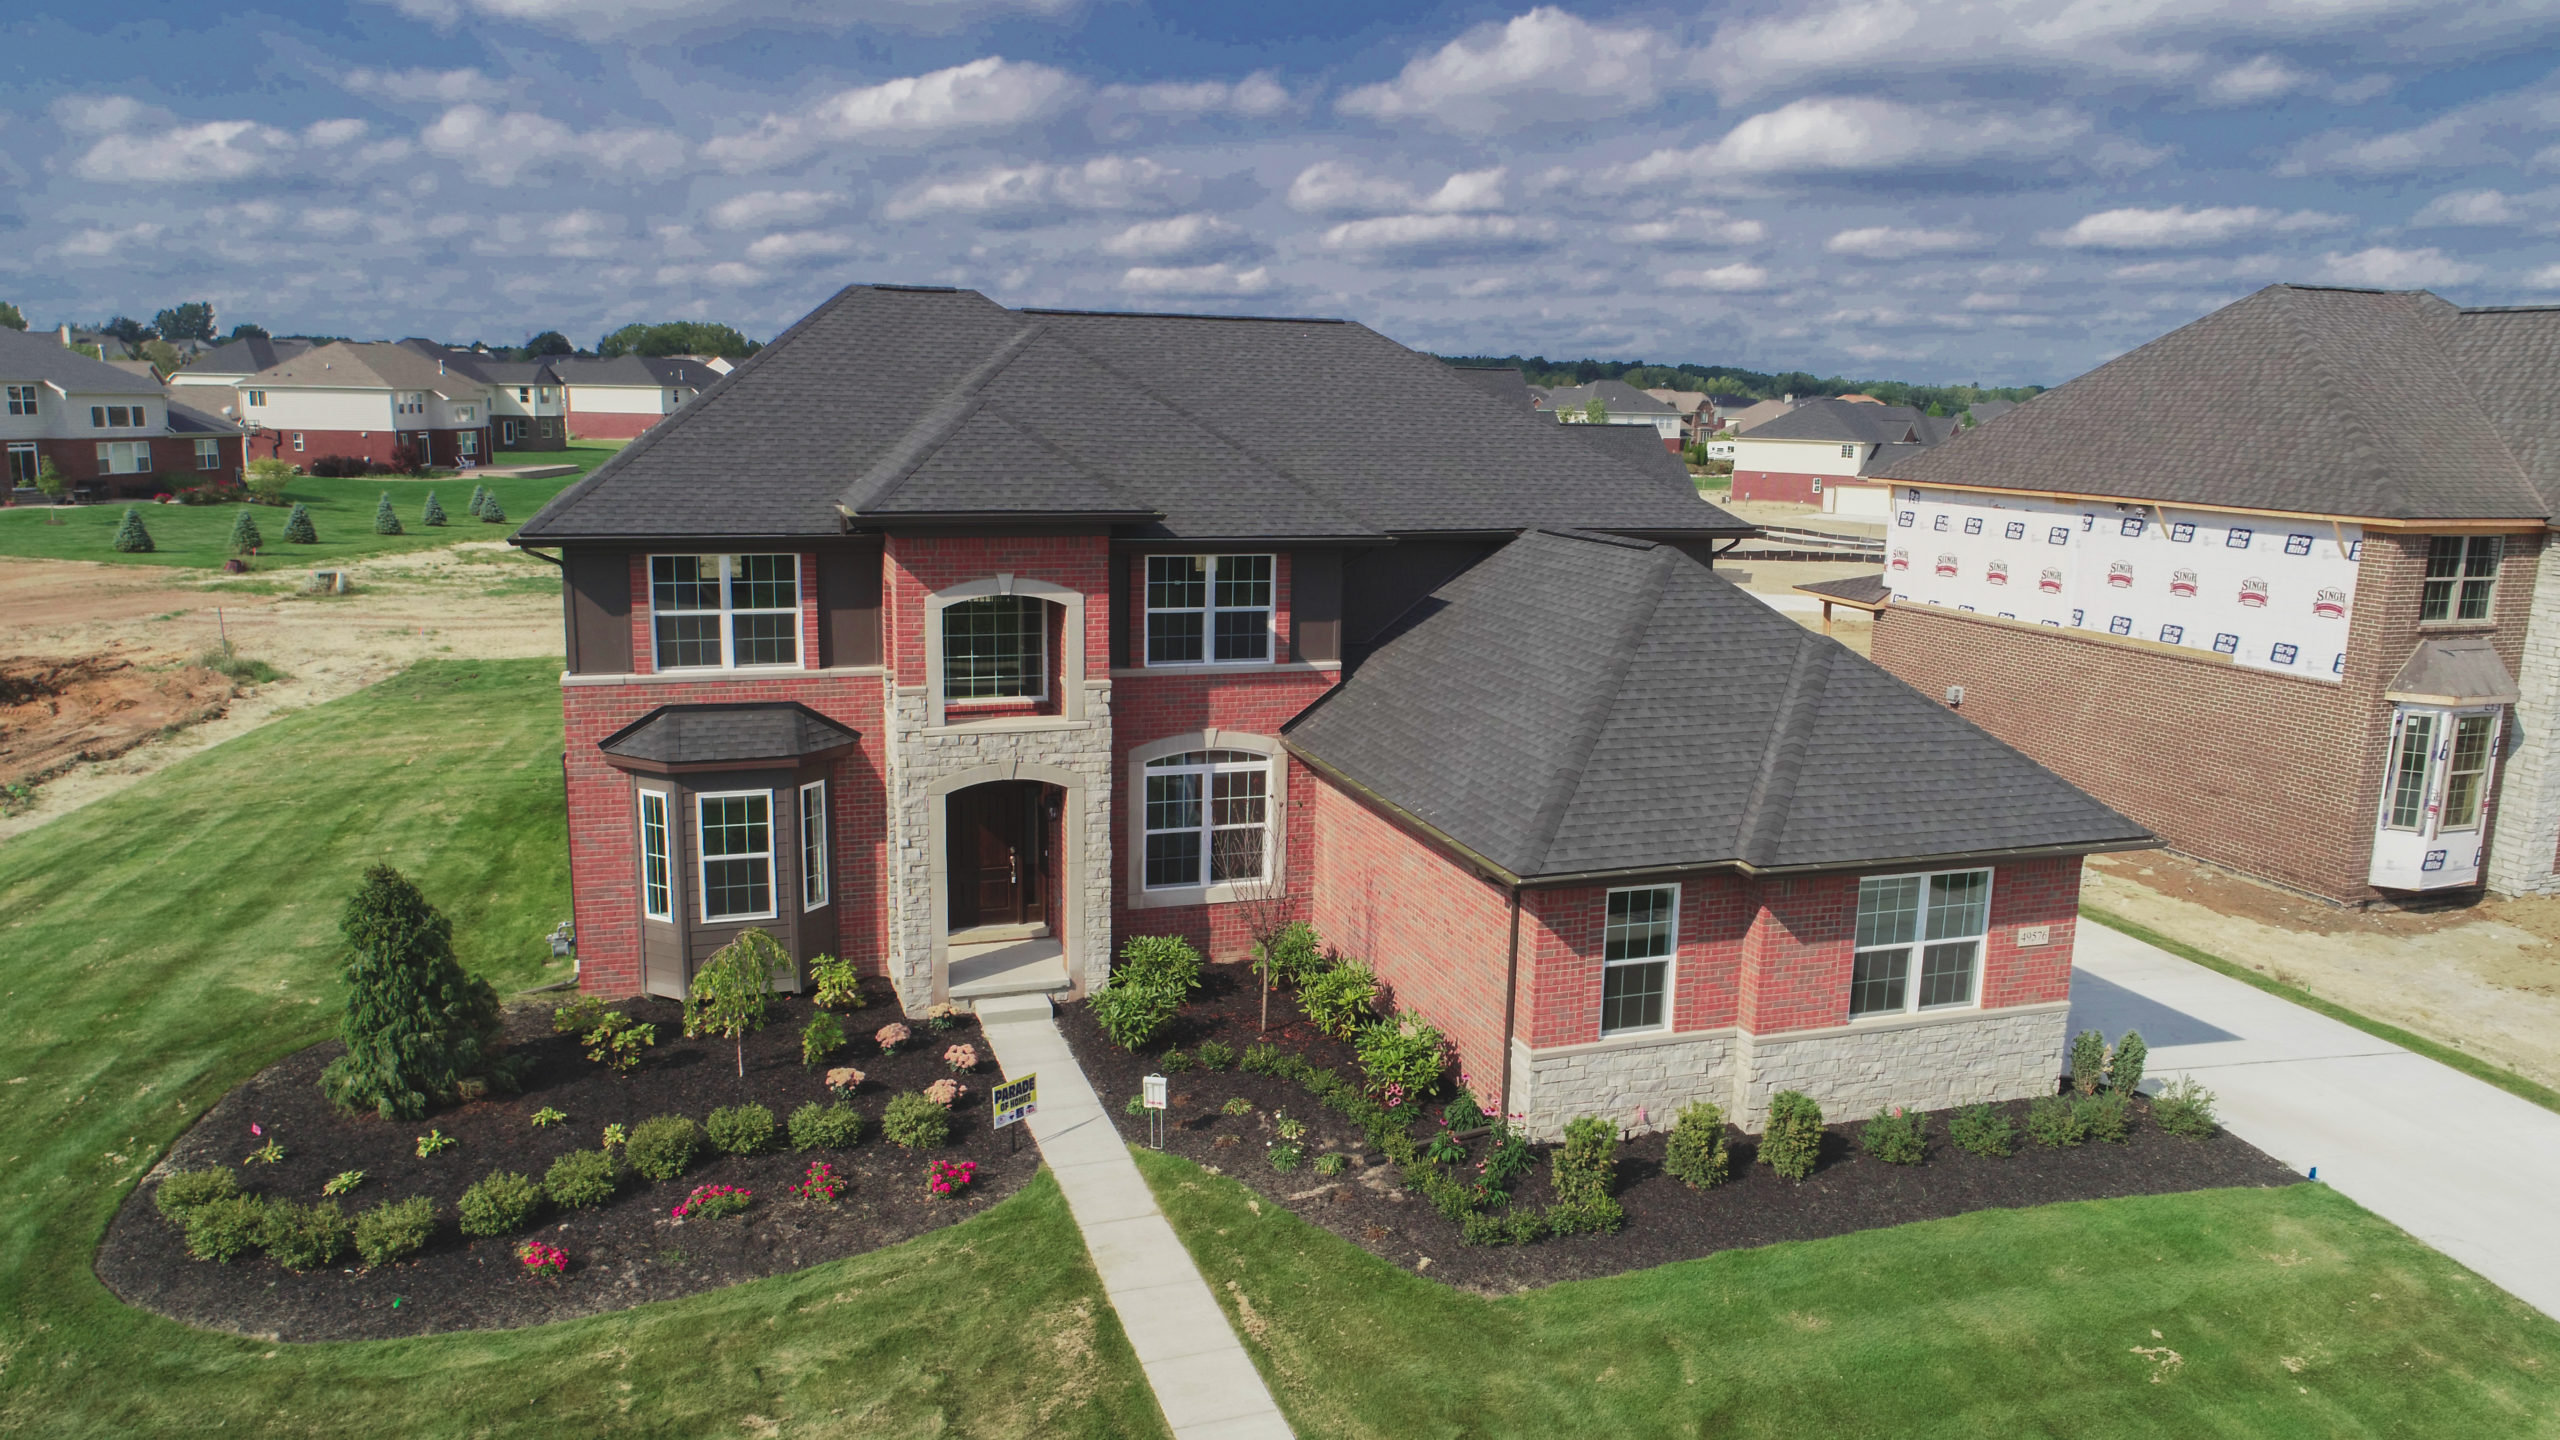 There are many benefits of buying a new construction home in metro Detroit with Singh, including home warranties, enhanced features, and excellent community resources in Novi, South Lyon, and Canton.